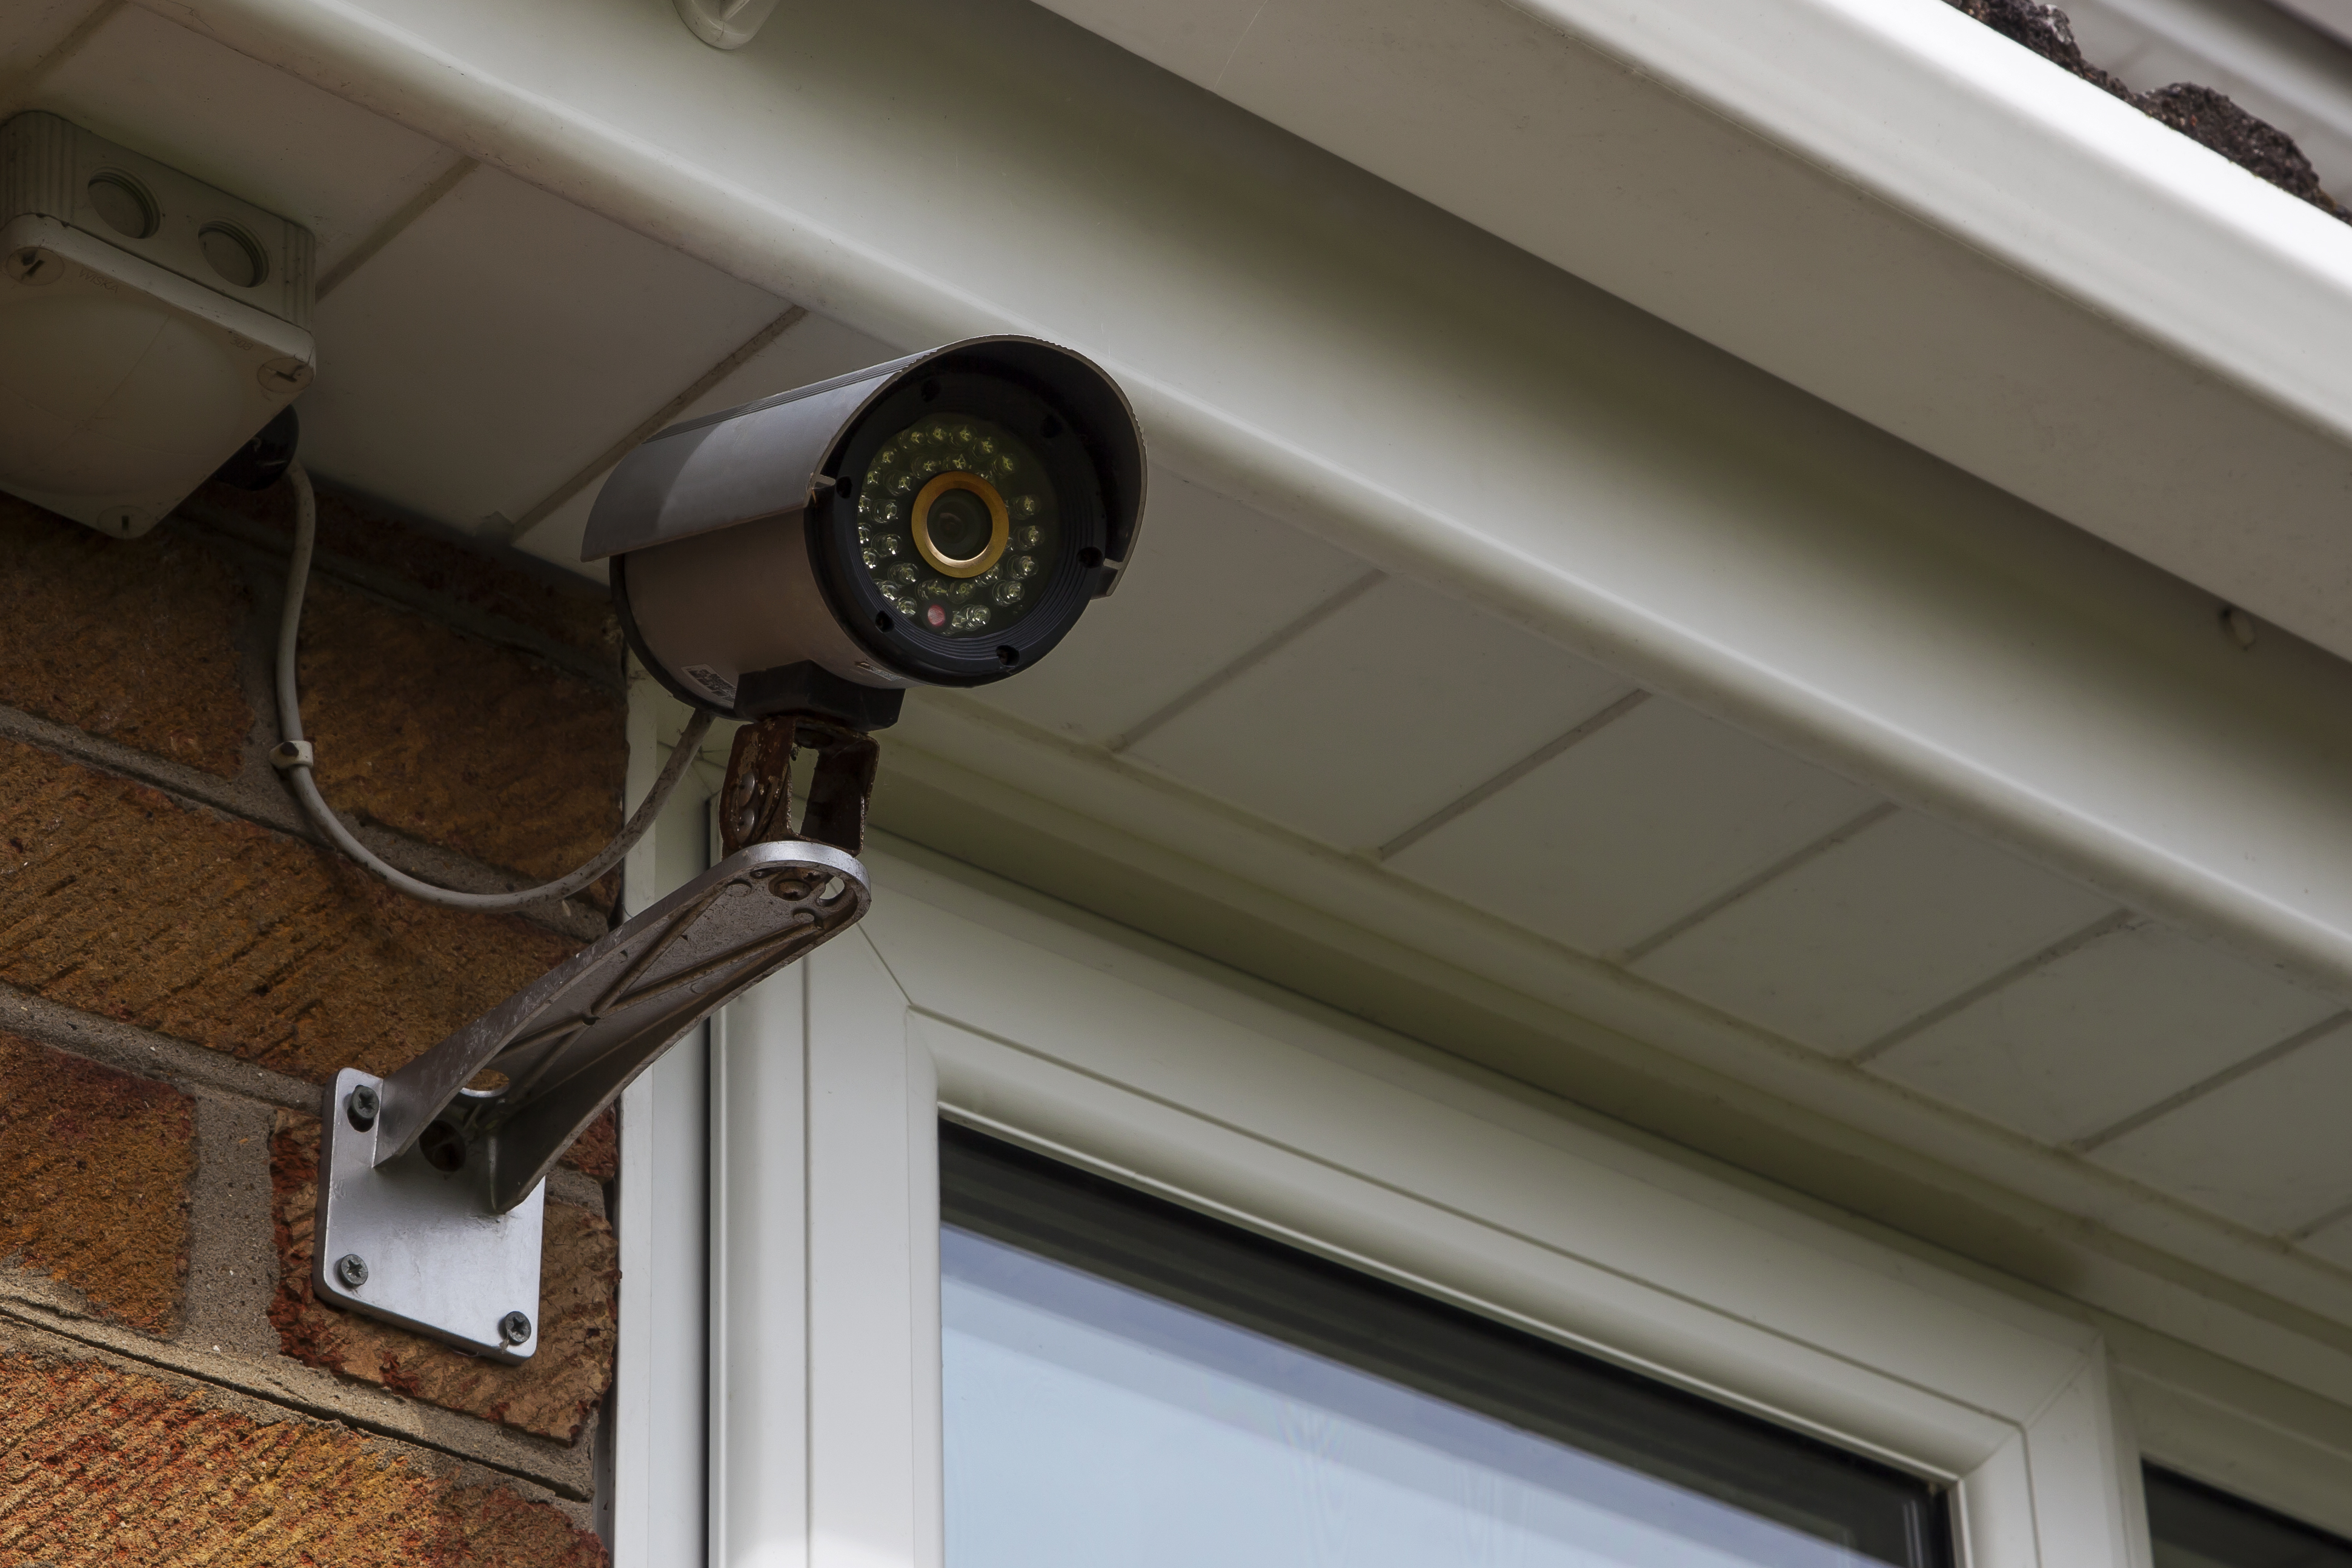 Beneficial Reasons to Maintain Your Home Security System